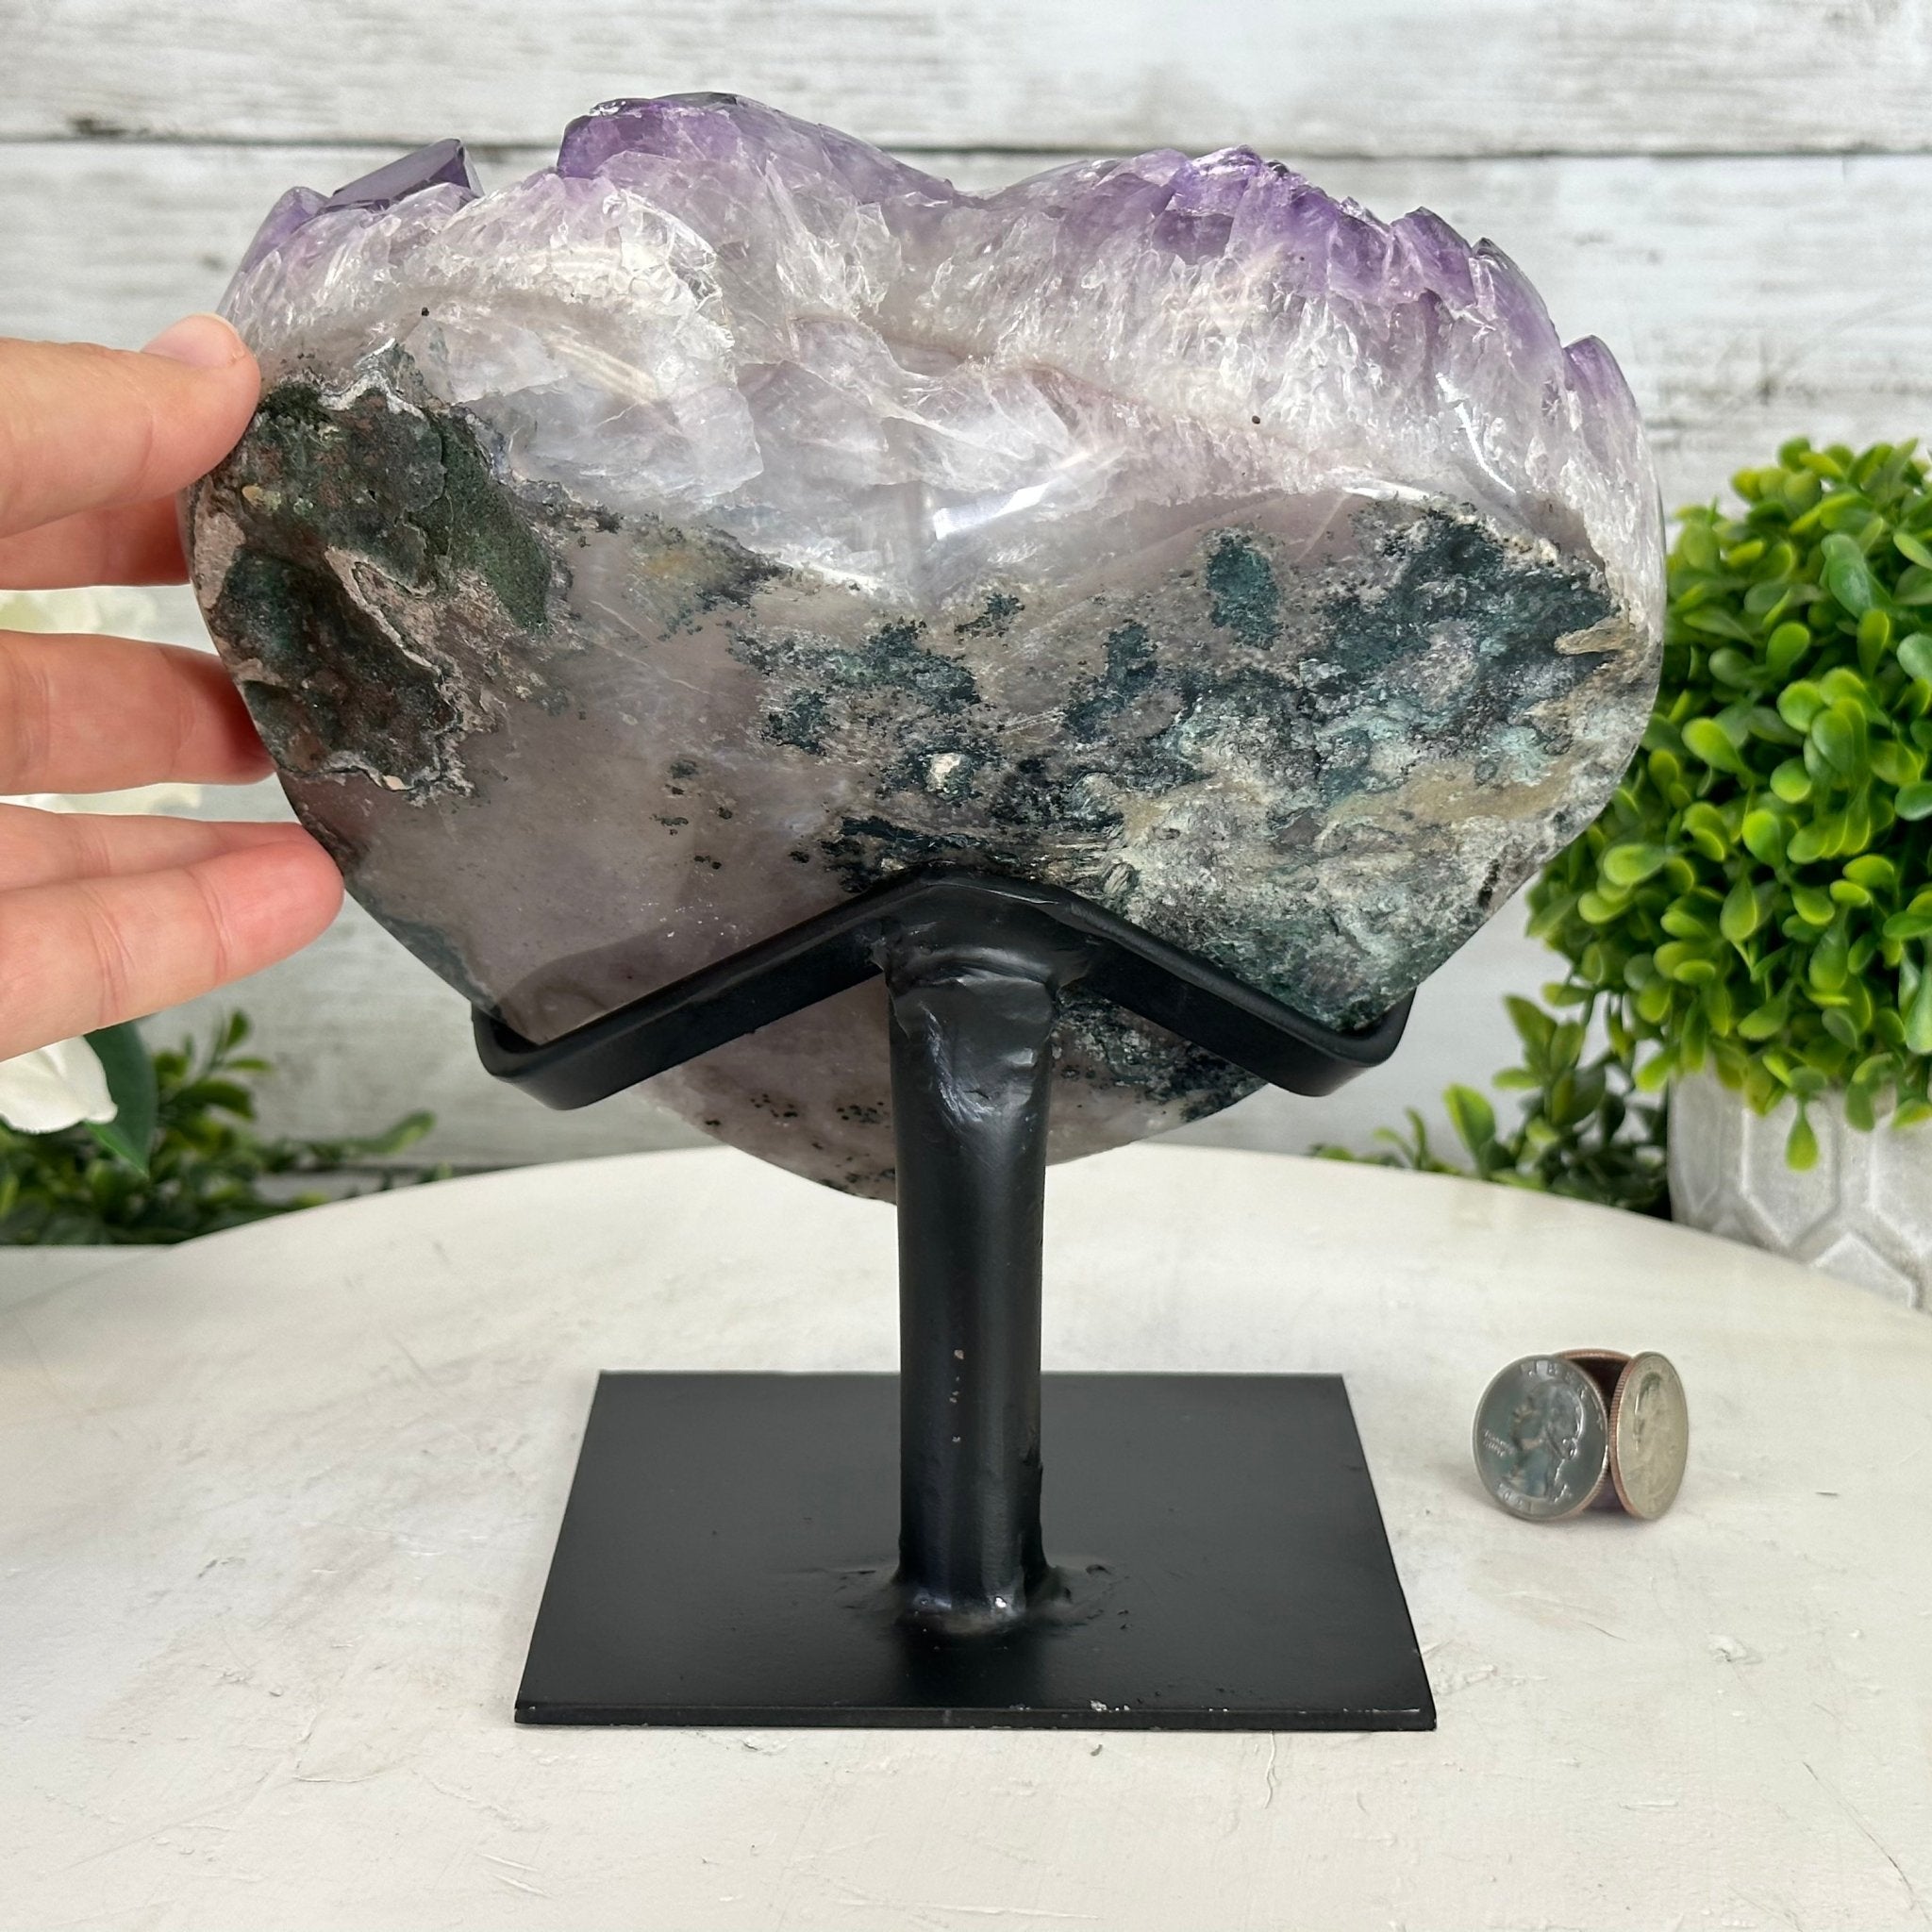 Extra Quality Amethyst Heart Geode w/ metal stand, 8.7 lbs & 8" Tall #5463-0293 - Brazil GemsBrazil GemsExtra Quality Amethyst Heart Geode w/ metal stand, 8.7 lbs & 8" Tall #5463-0293Hearts5463-0293